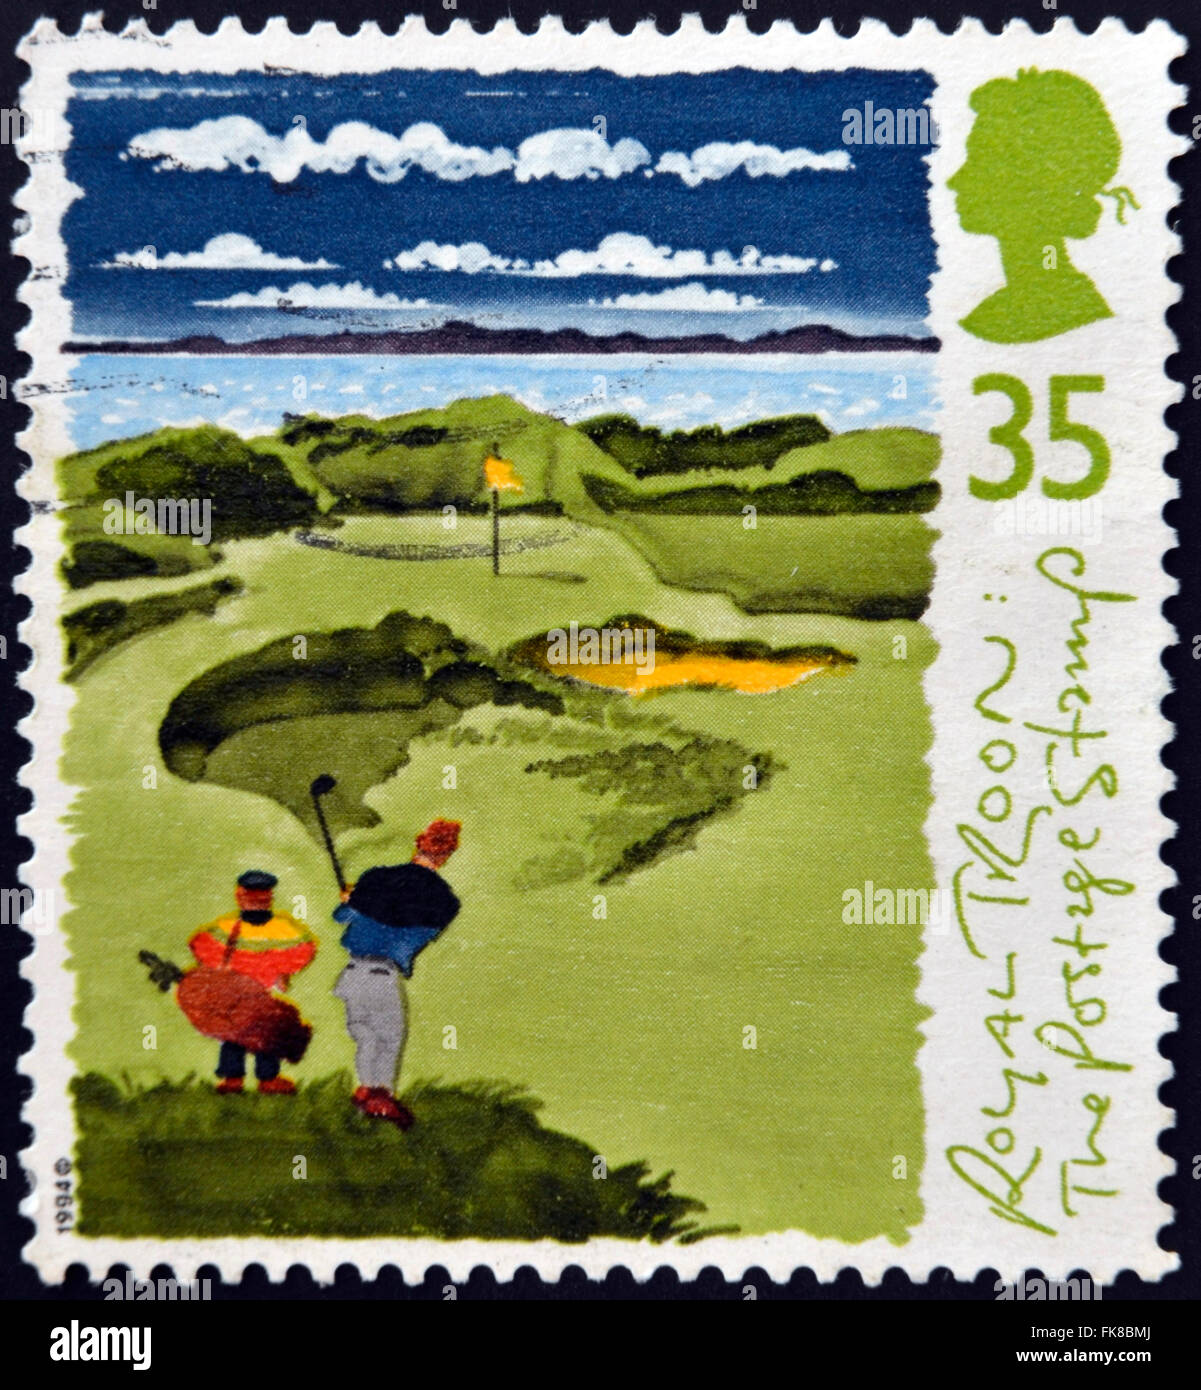 UNITED KINGDOM - CIRCA 1994: A stamp printed in Great Britain shows Golfers with inscriptions 'royal troon', series 'Honorable C Stock Photo